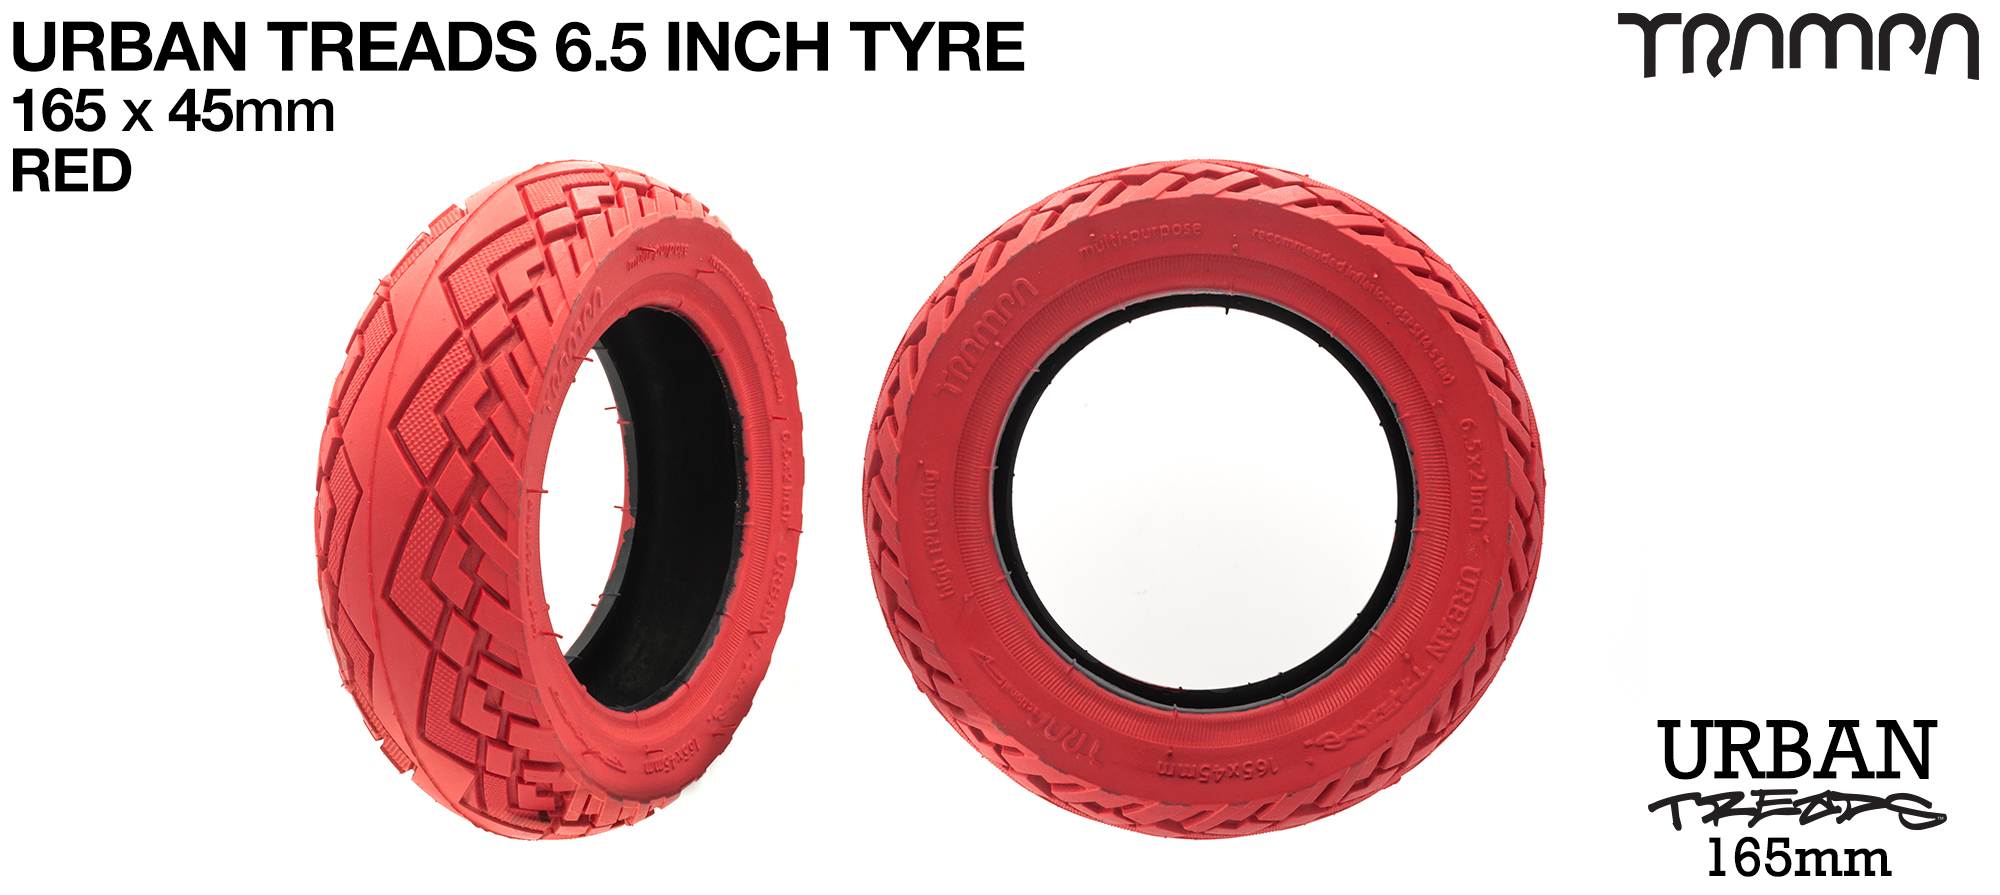 6 Inch TRAMPA URBAN TREADS Tyre & Tube - RED